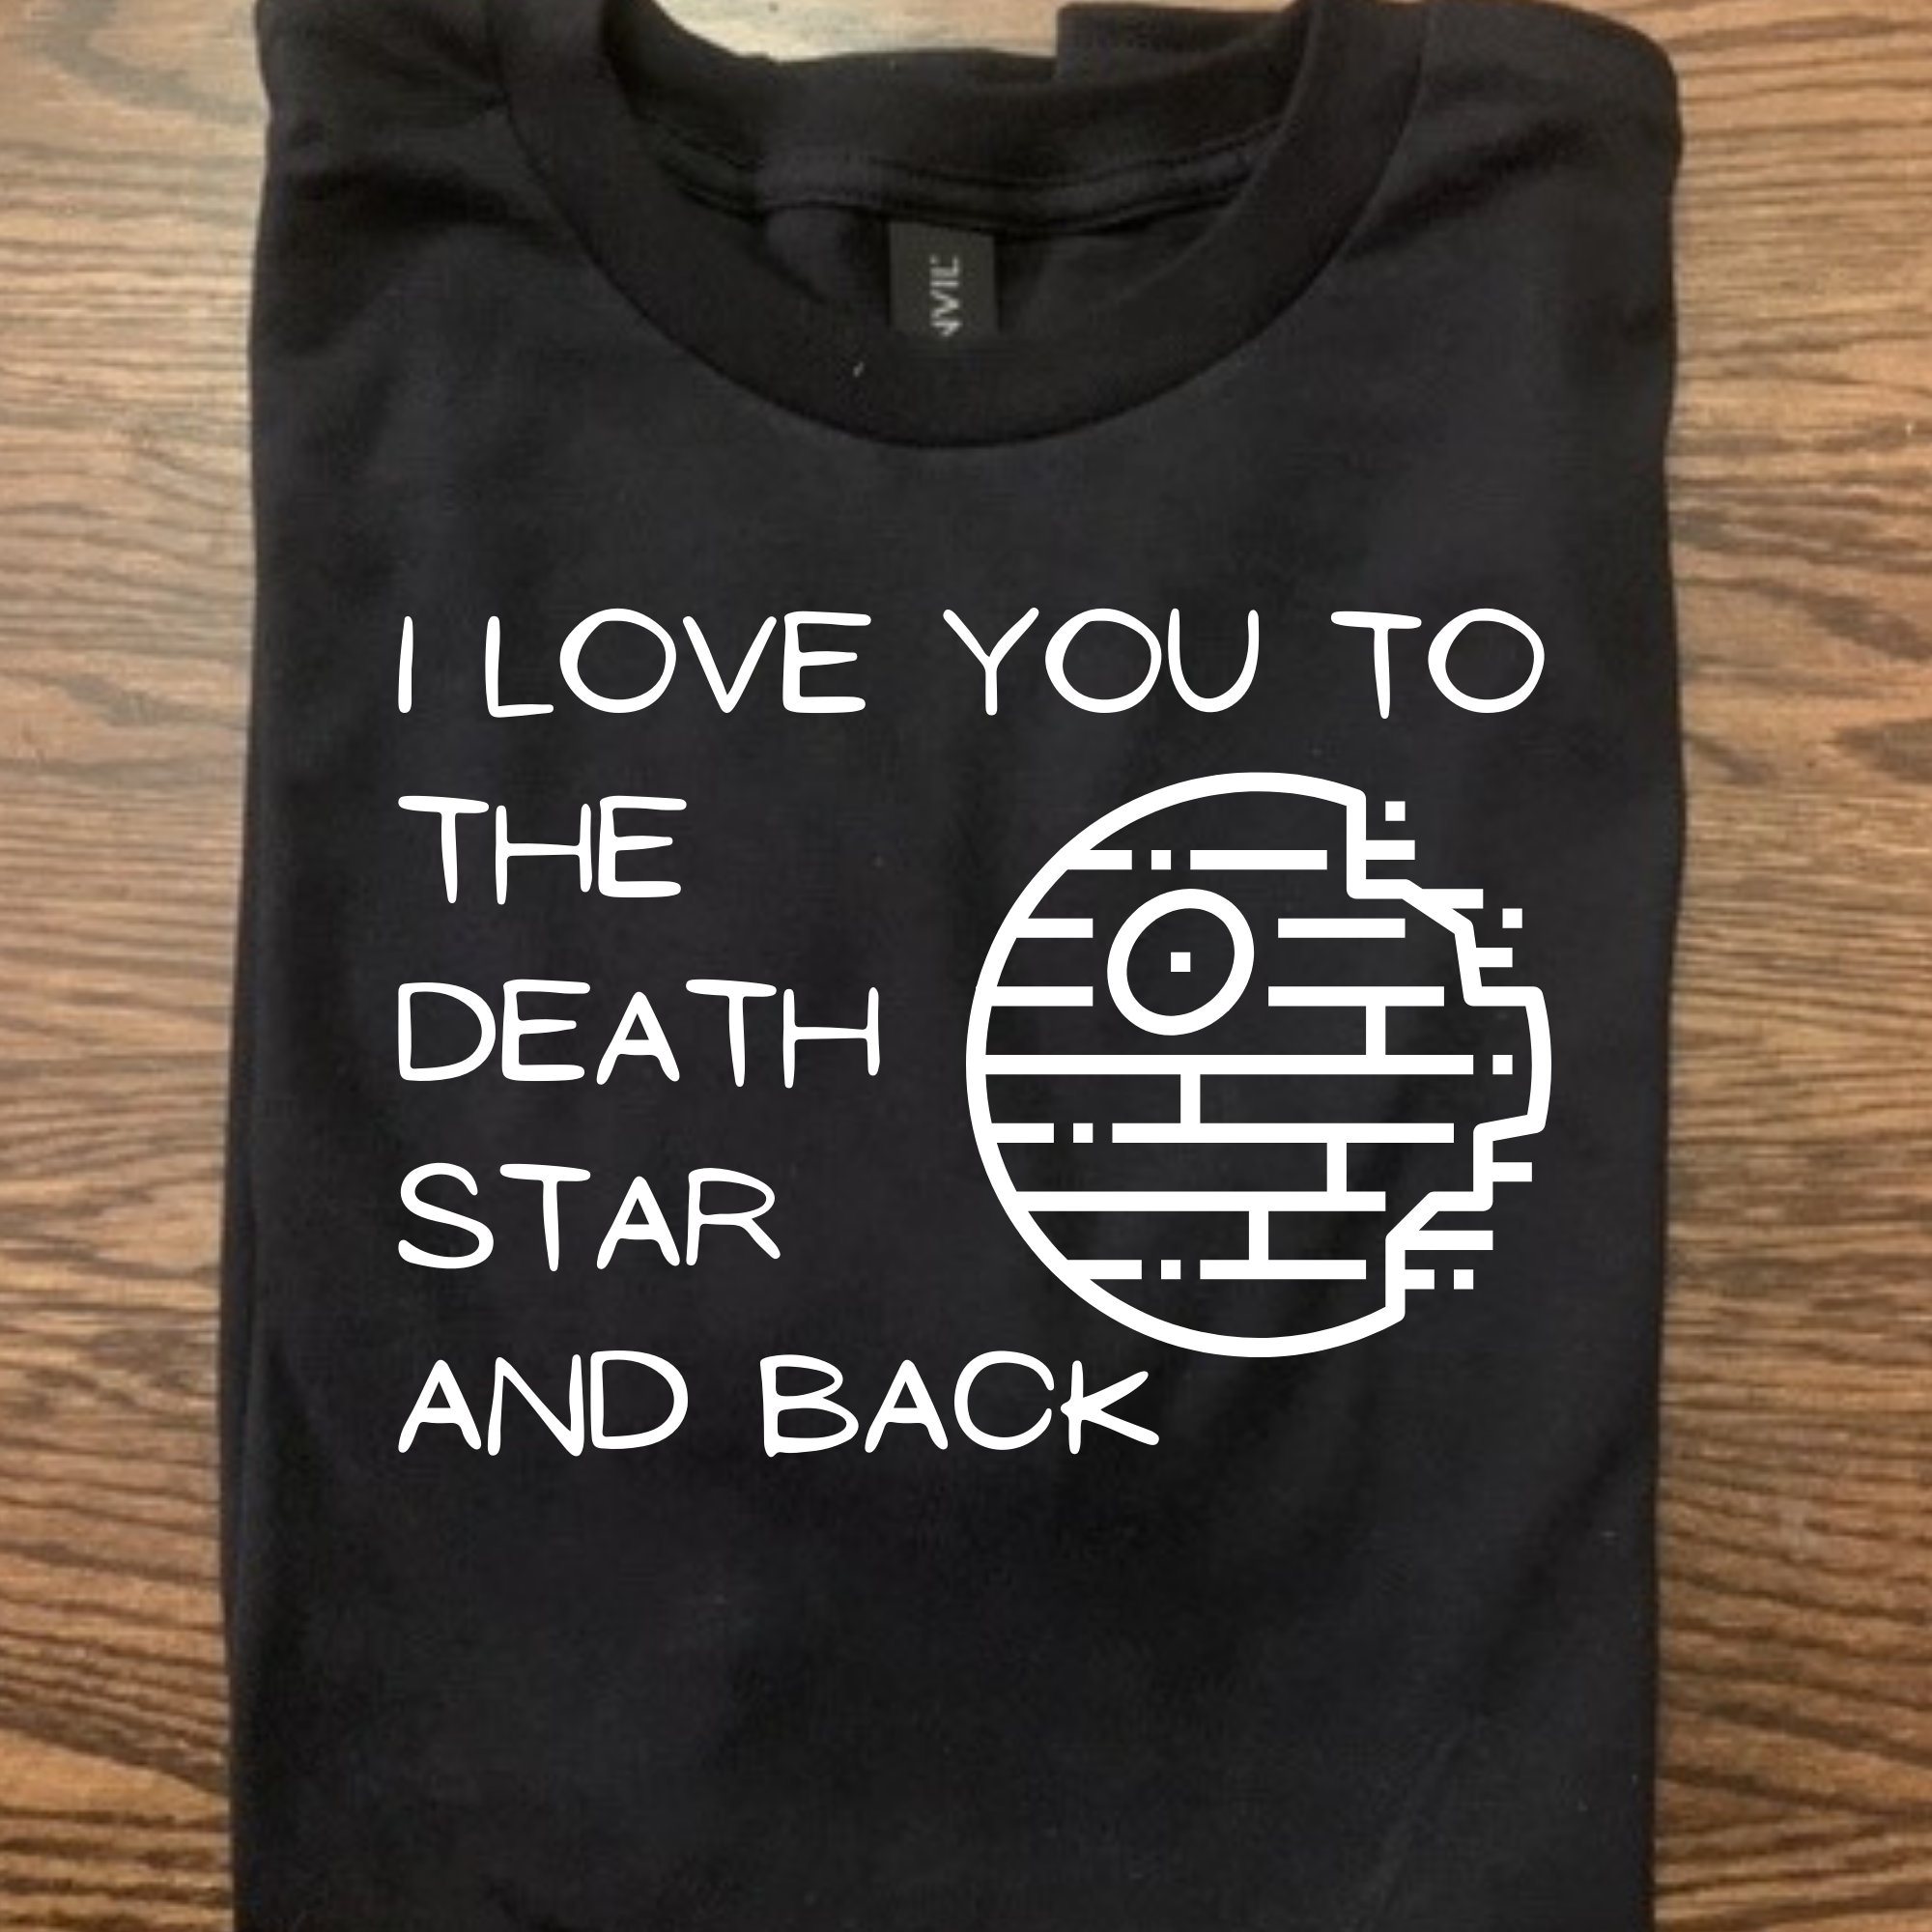 I Love You to the Death Star and Back - Star Wars Shirt - Men's/Unisex and Women's/Ladies sizing - T-shirt